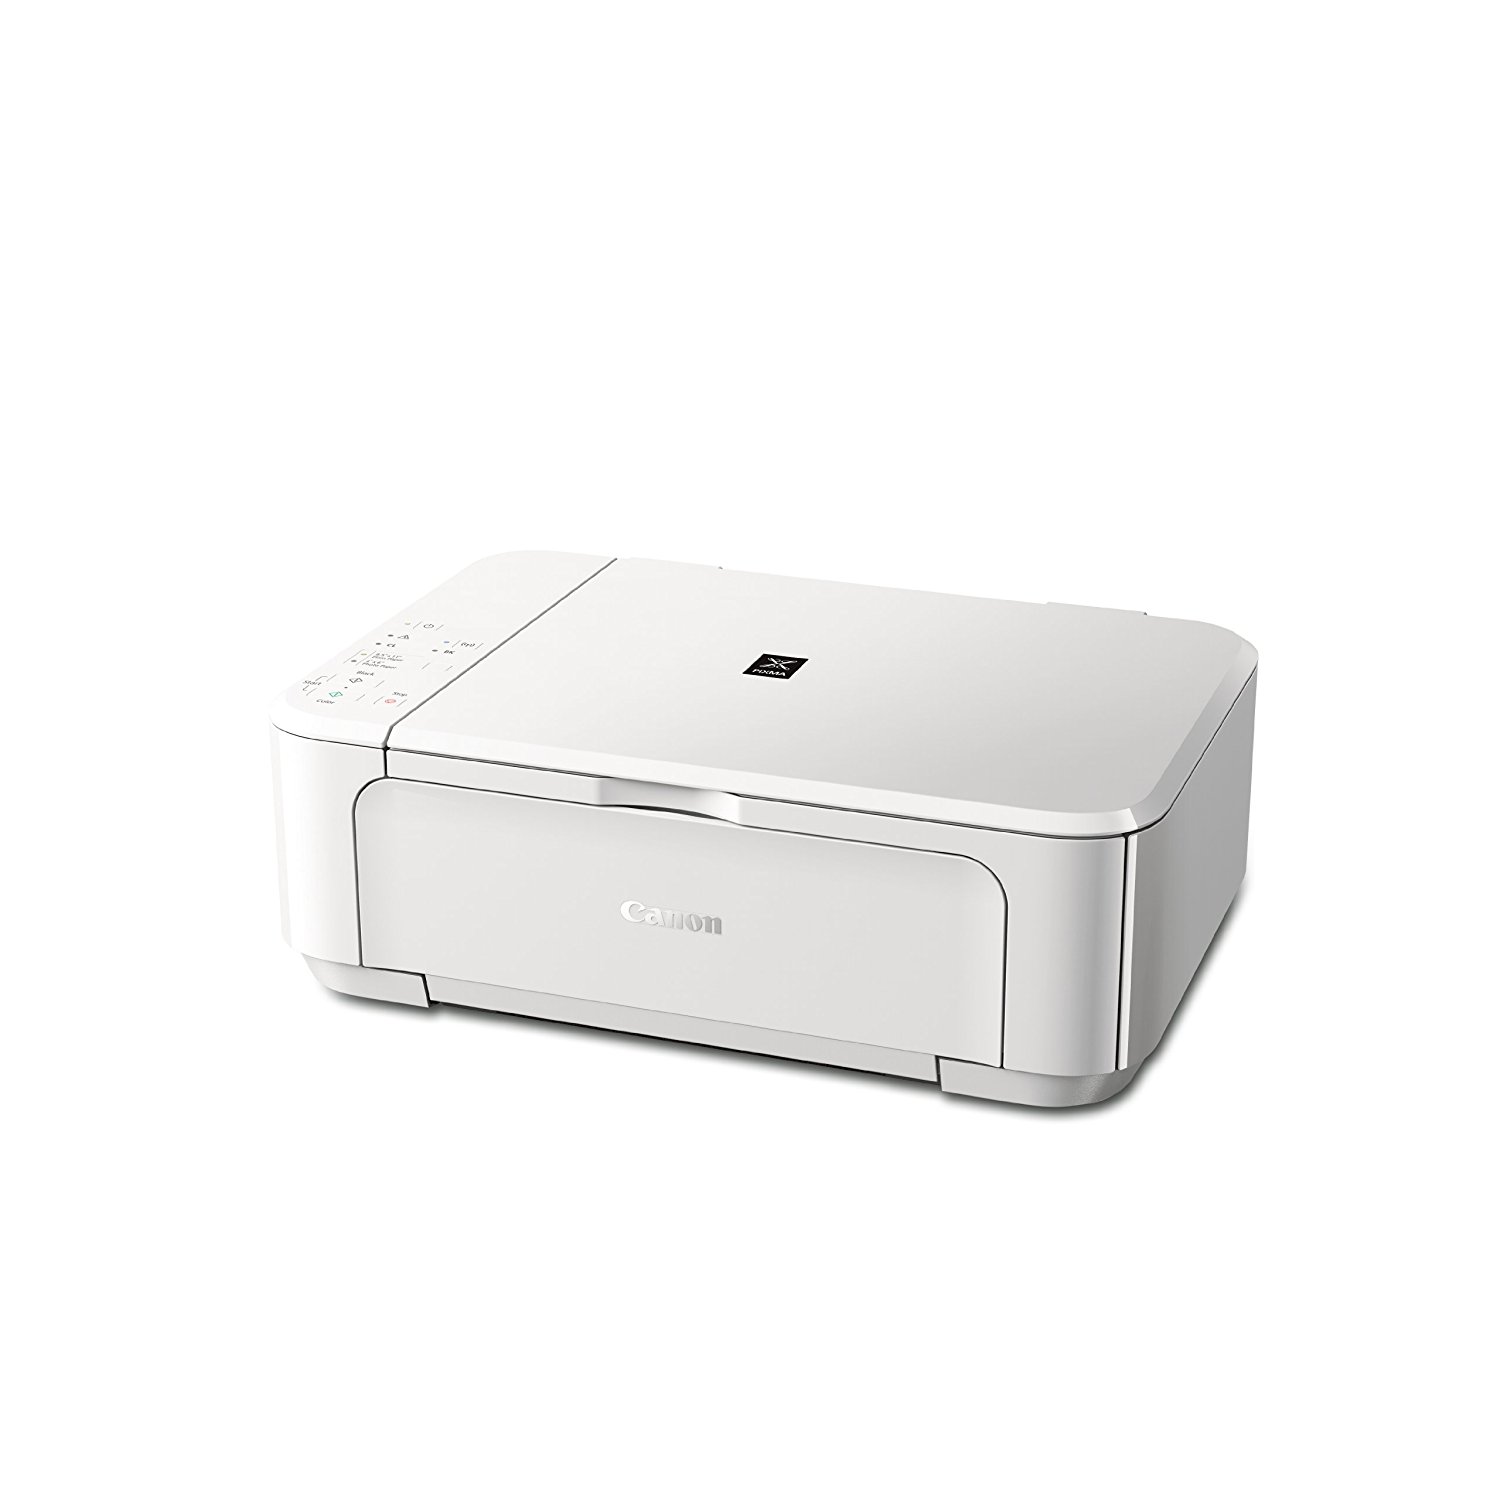 Canon Pixma Mg3520 Wireless Color Printer With Scanner And Copier N18 Free Image Download 8752